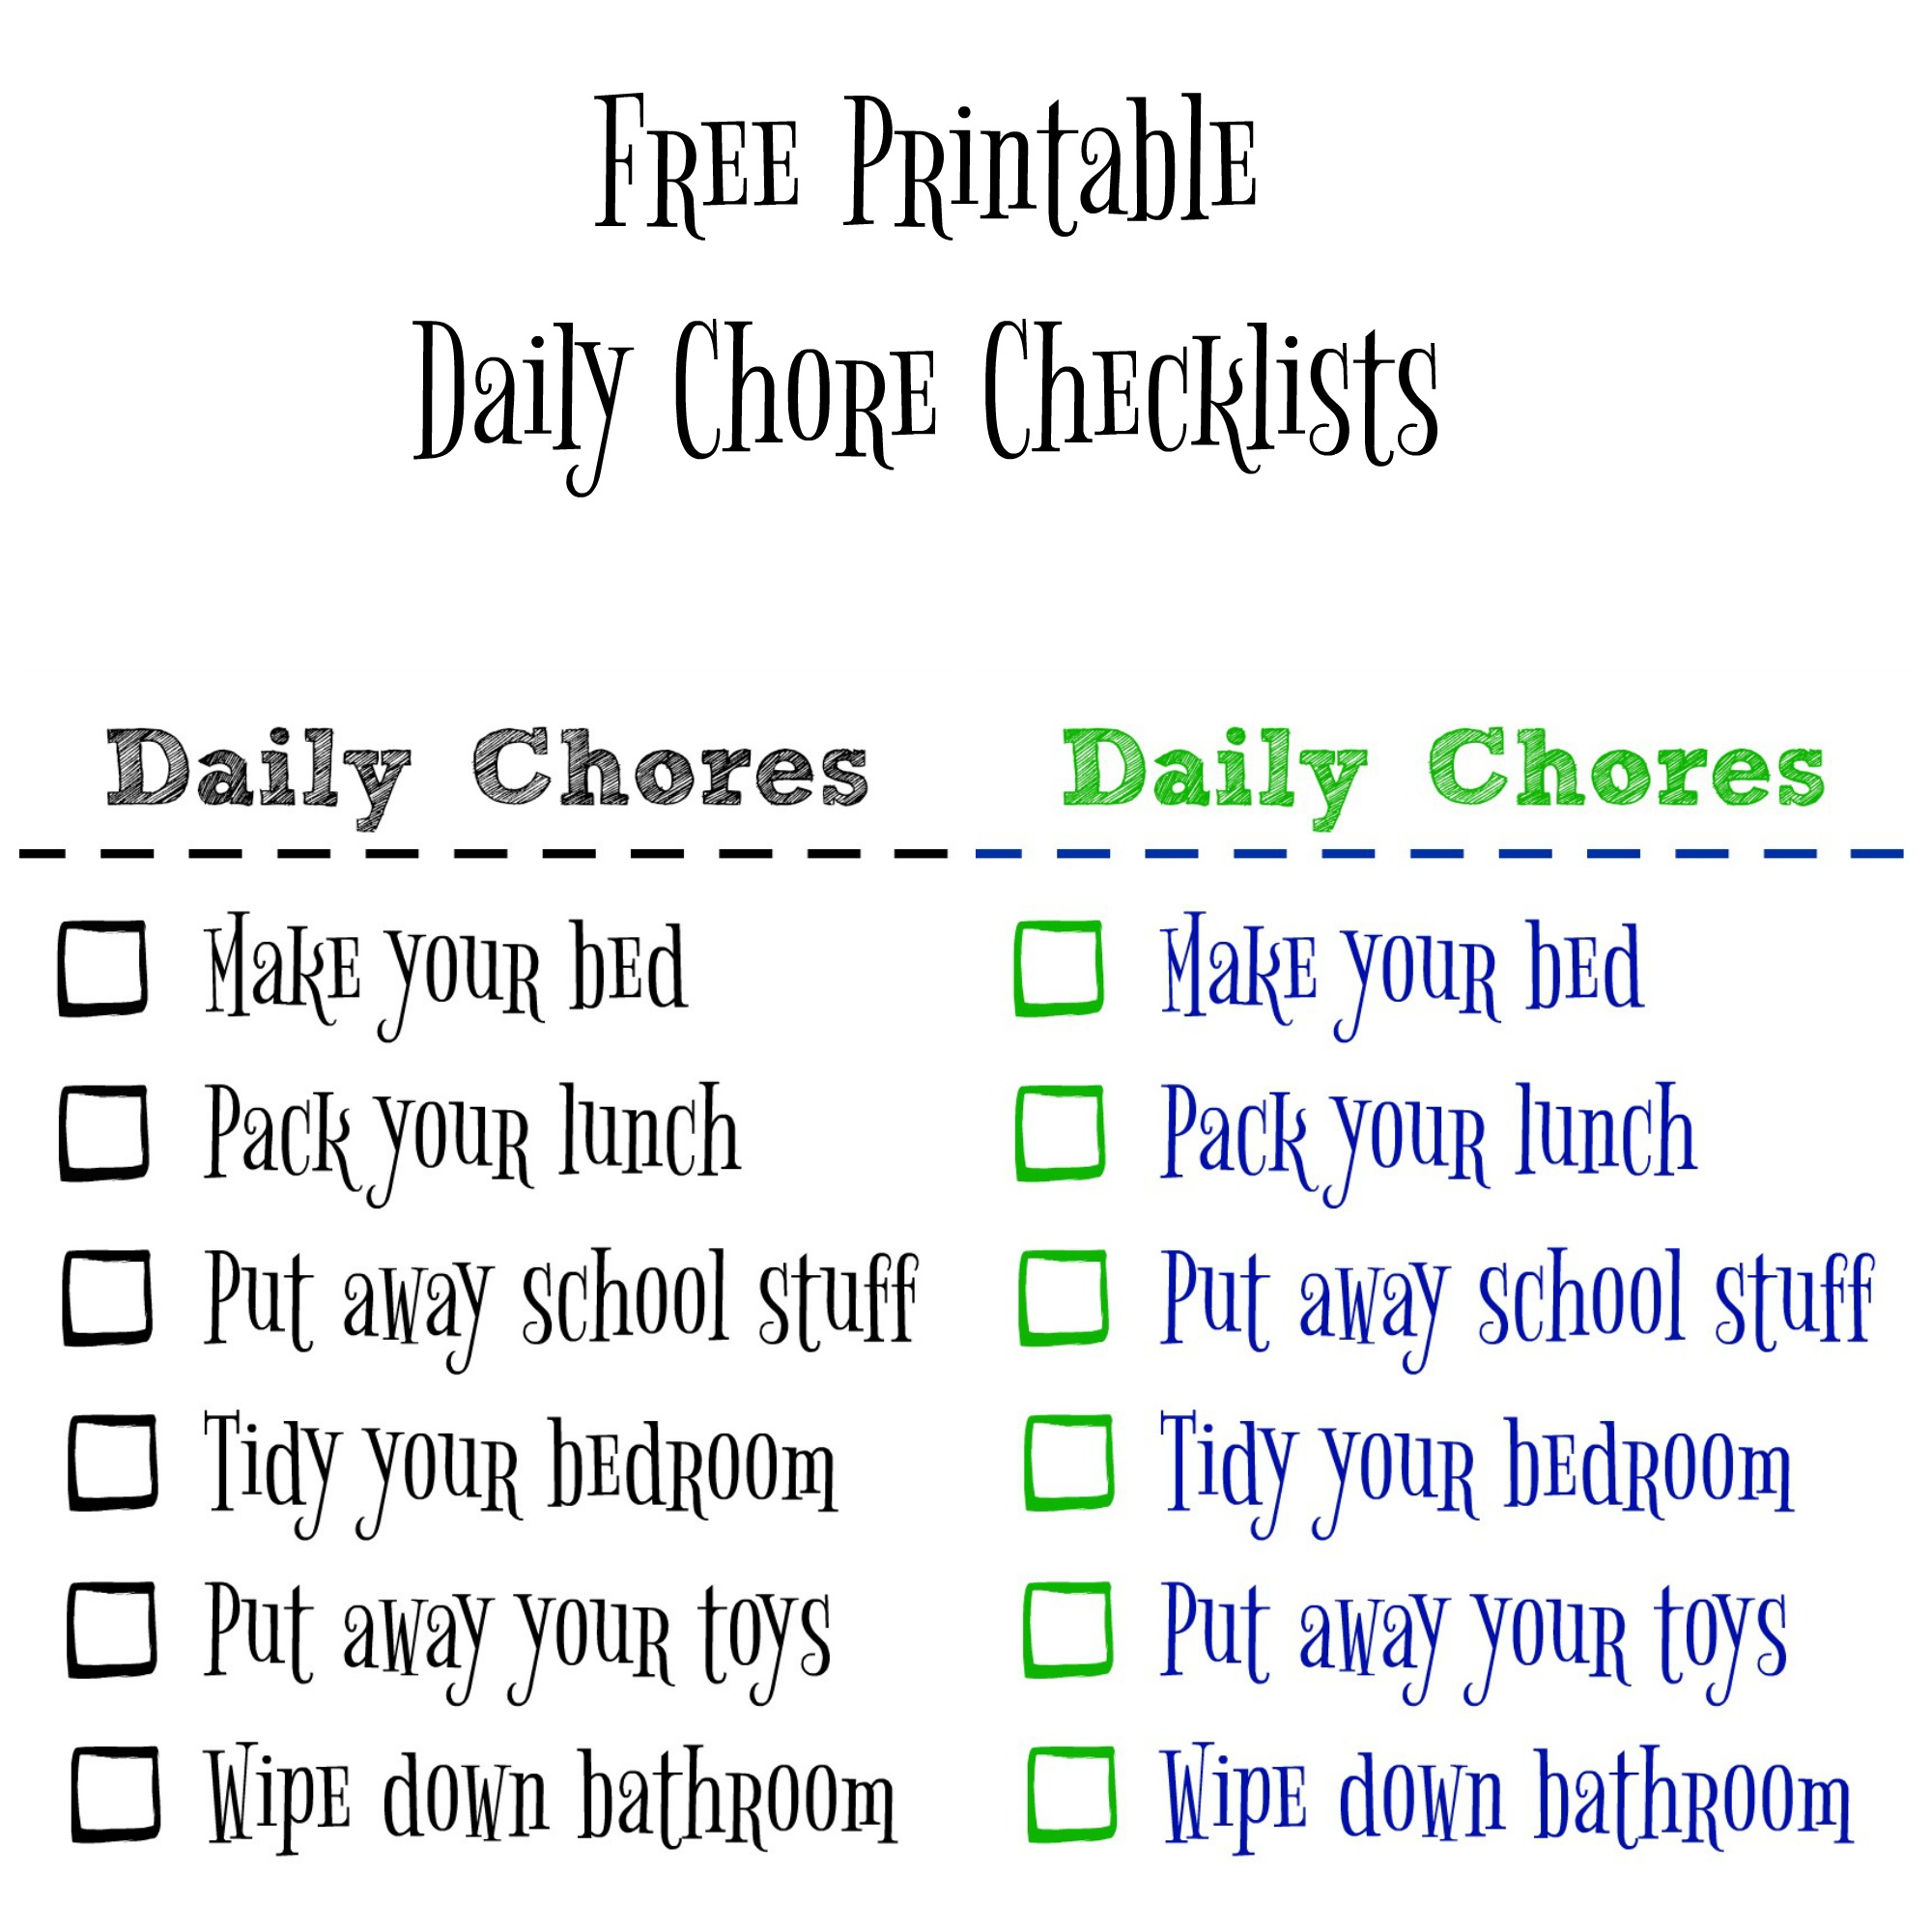 15 Free Kids Chore Chart Printables- If you're having trouble motivating your kids to do their chores, why not try giving them one of these free printable chore charts for kids! | #freePrintable #printables #choreCharts #kidsChores #ACultivatedNest